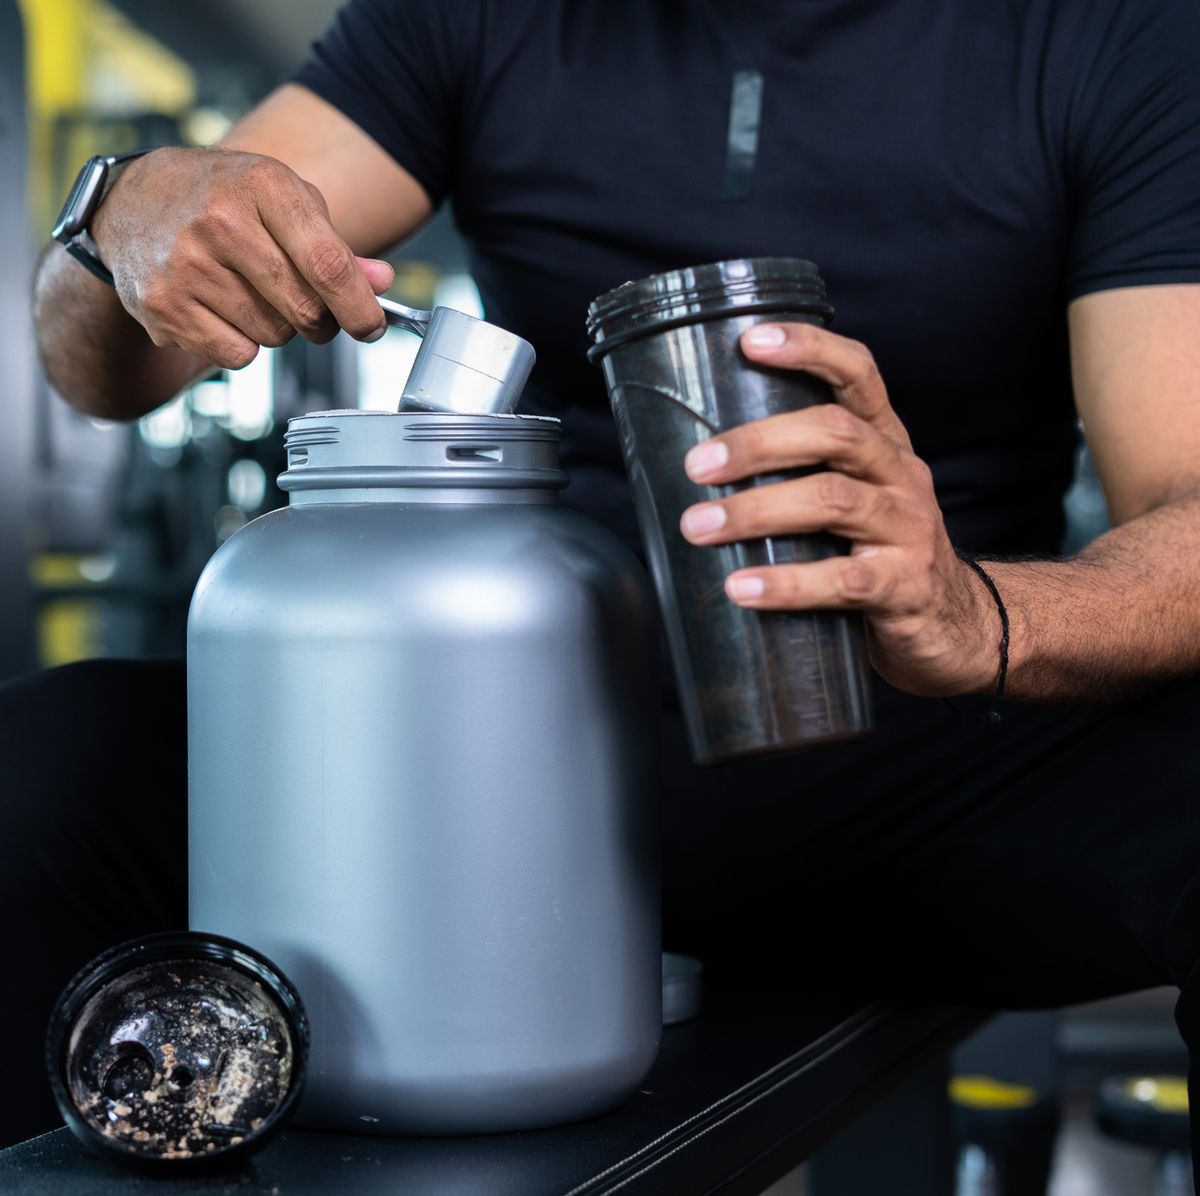 close up shot of bodybuilder hands taking protein powder and mixing with water on bottle by shaking at gym   concept of muscular gain, nutritional supplement and wellness